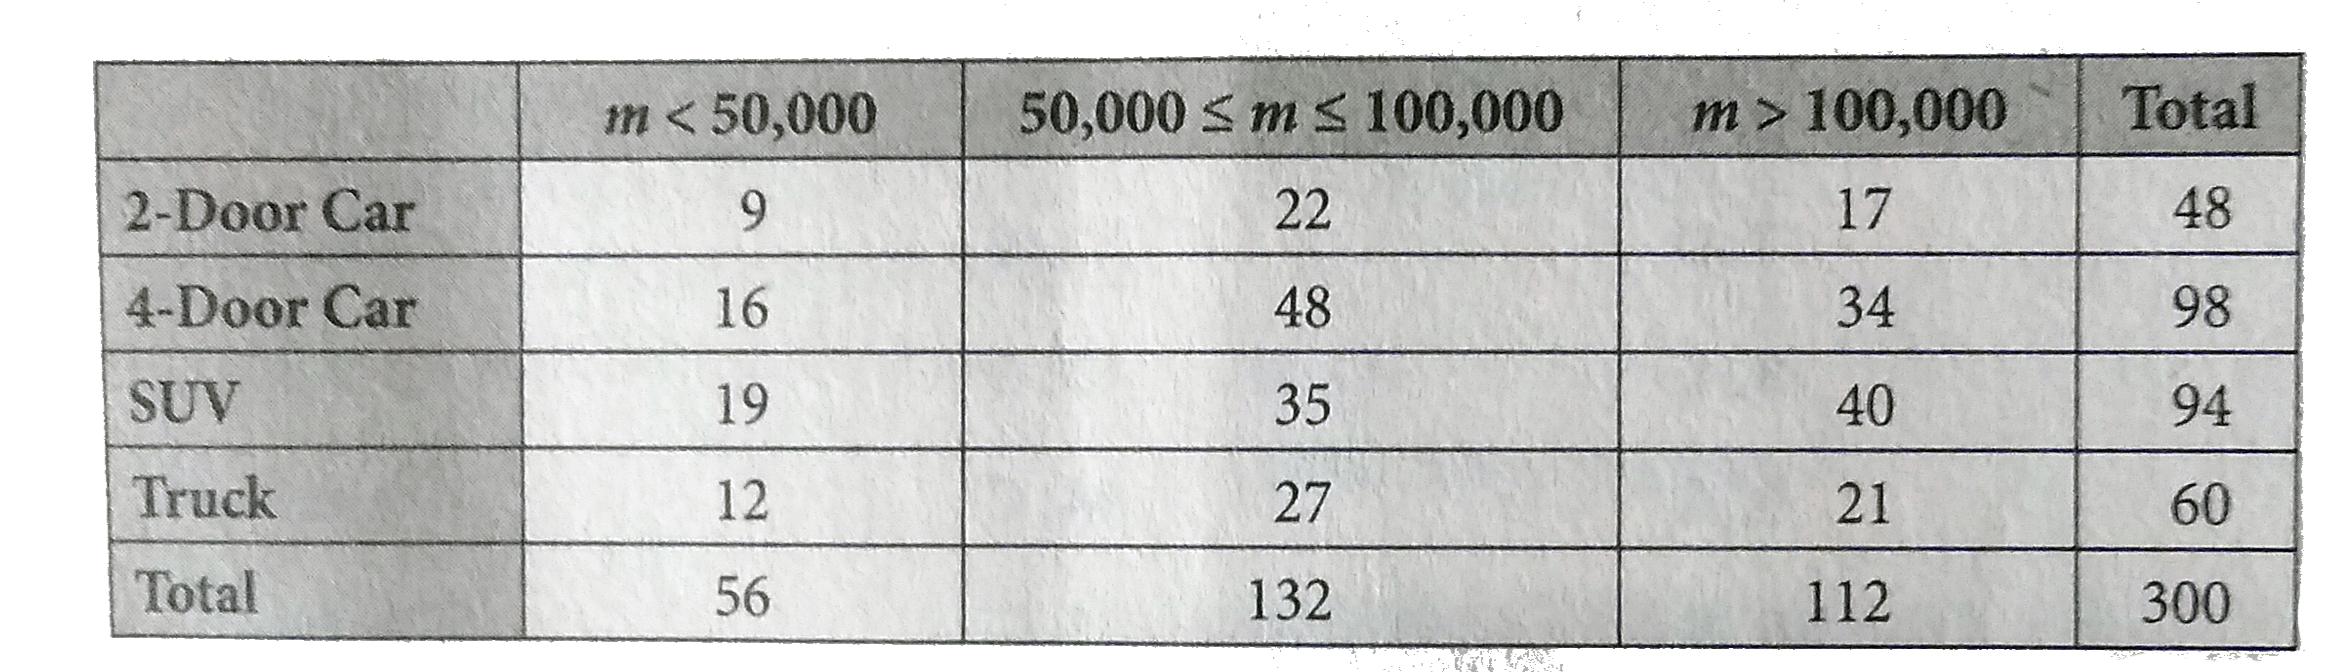 Based on the table, if a single vehicles is selected at random from all the vehicles on the lot to be given away in reffle, what is the probability that it will be an SUV or a truck that has been driven between 50,000 and 100,000 miles?